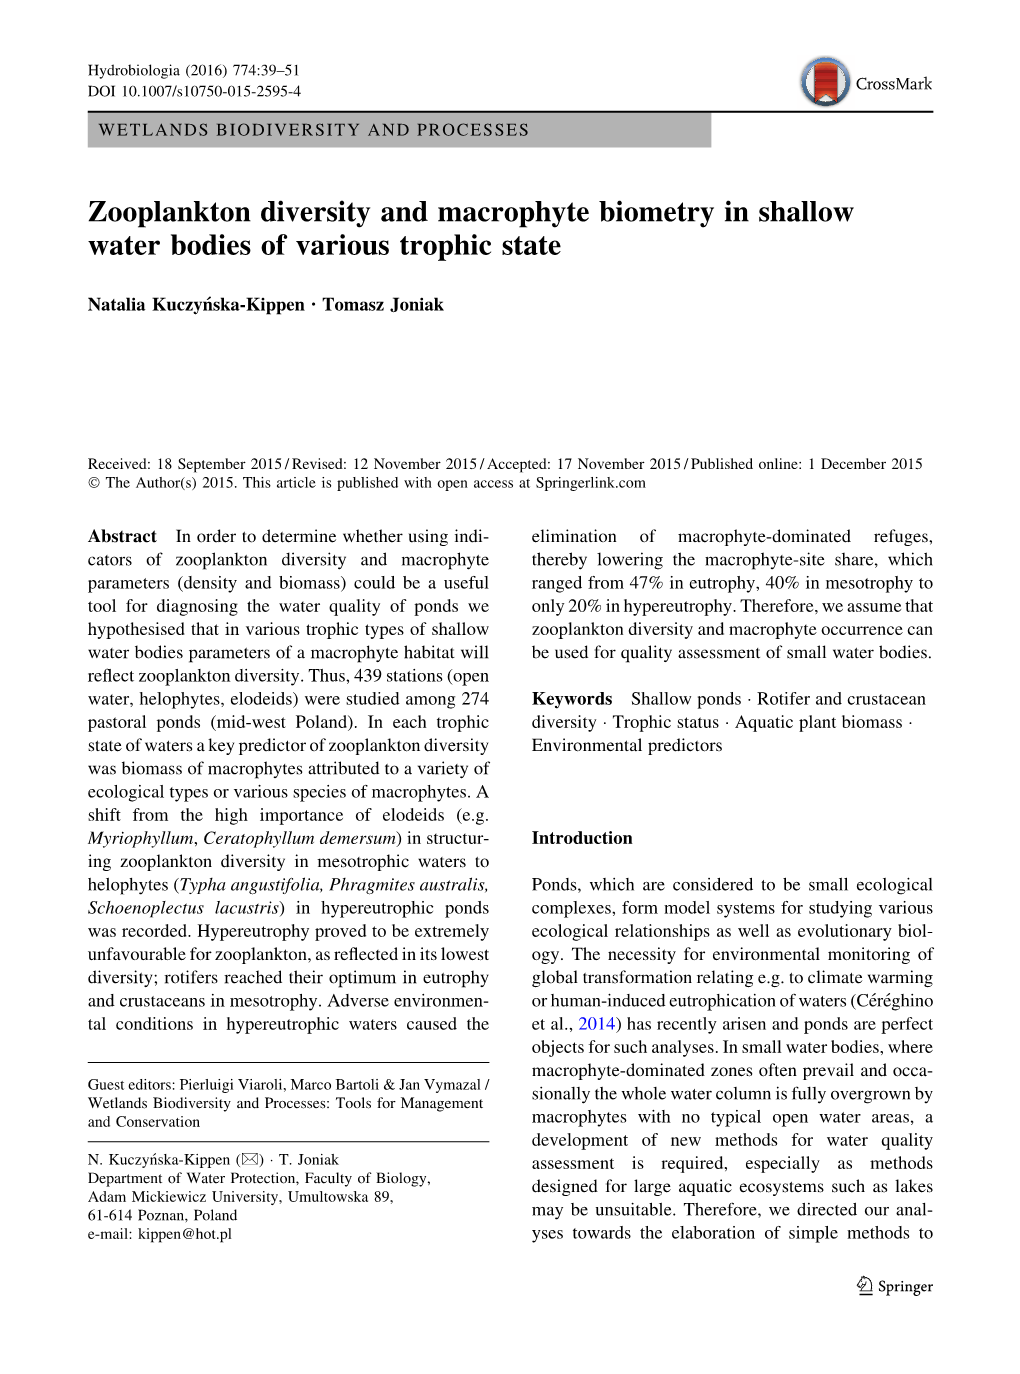 Zooplankton Diversity and Macrophyte Biometry in Shallow Water Bodies of Various Trophic State